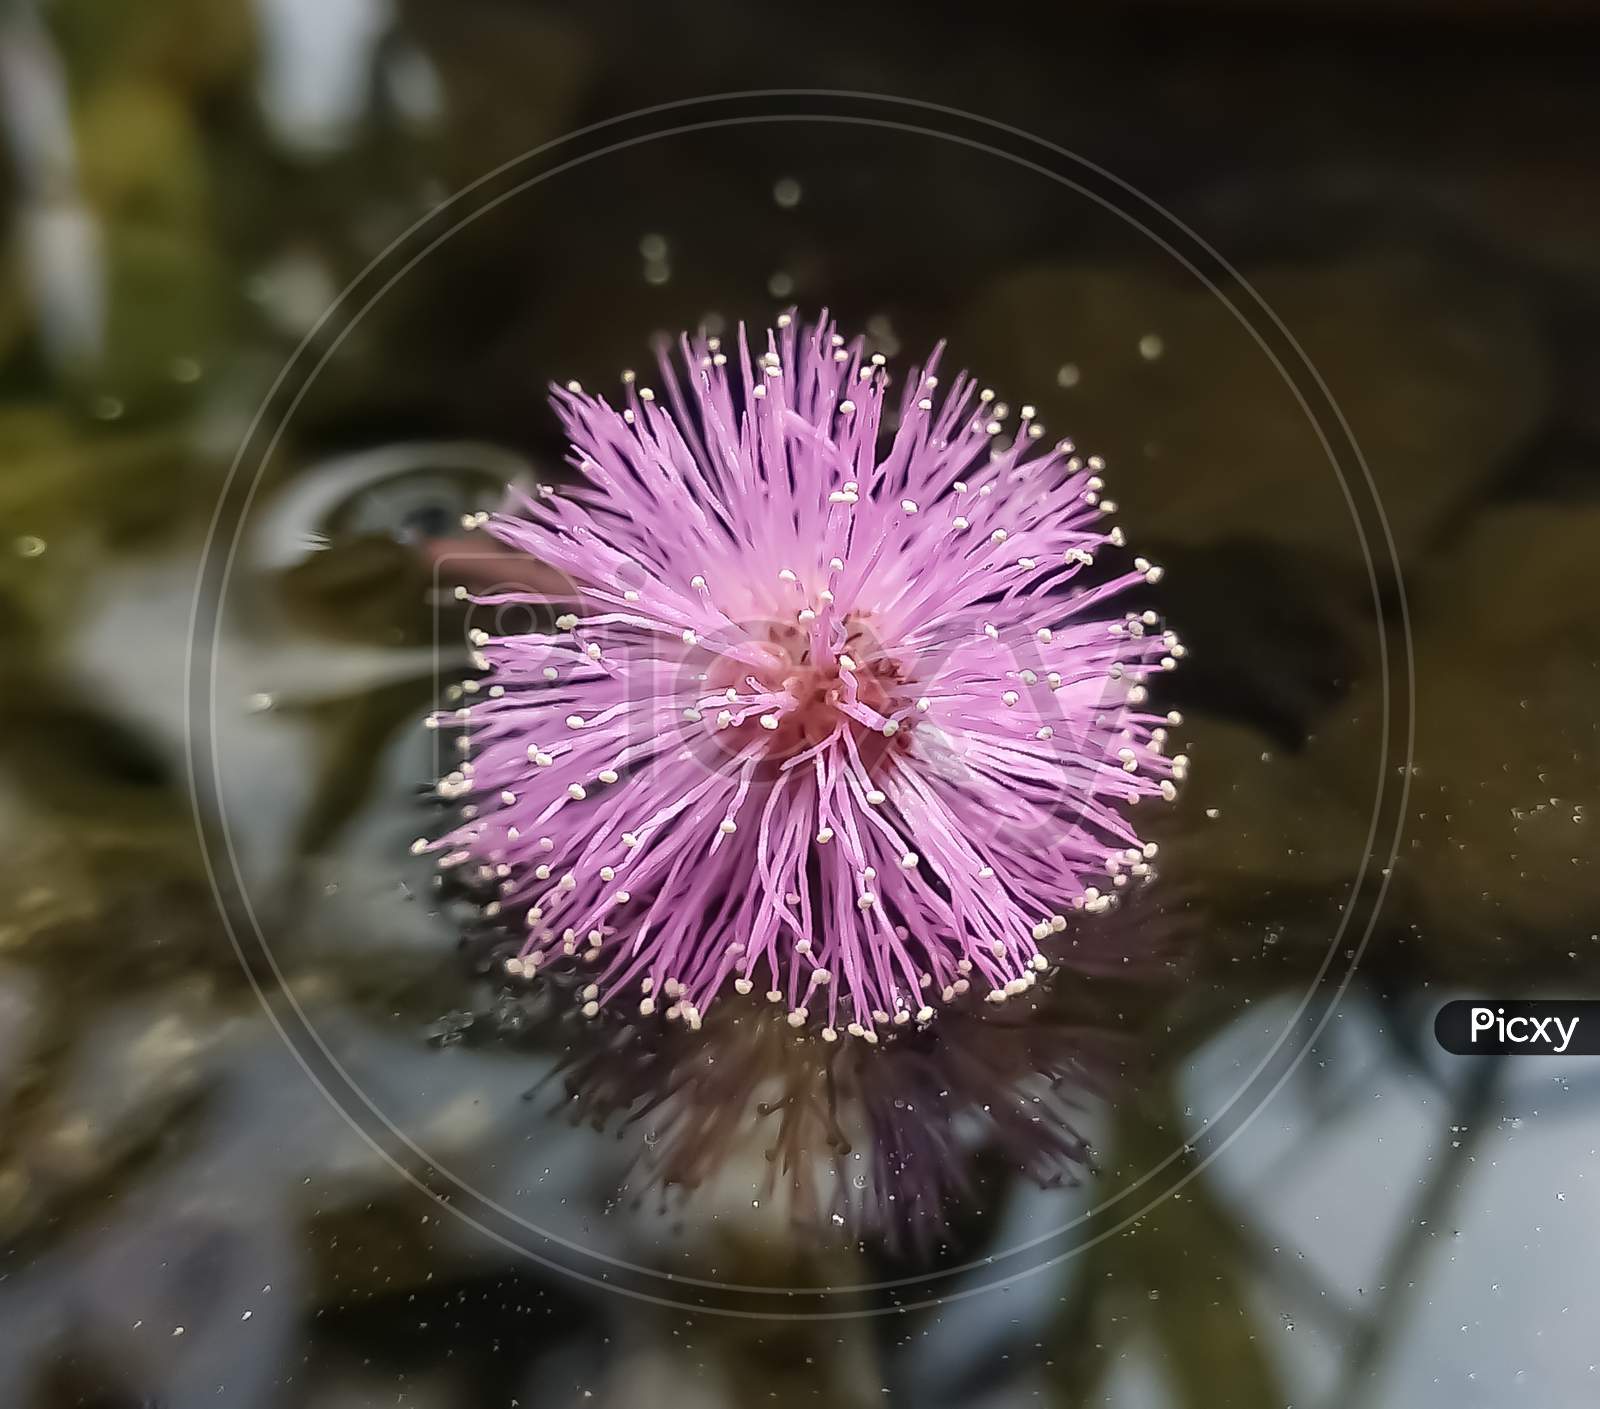 A Shine plant pink flower on the water, selective focus on object